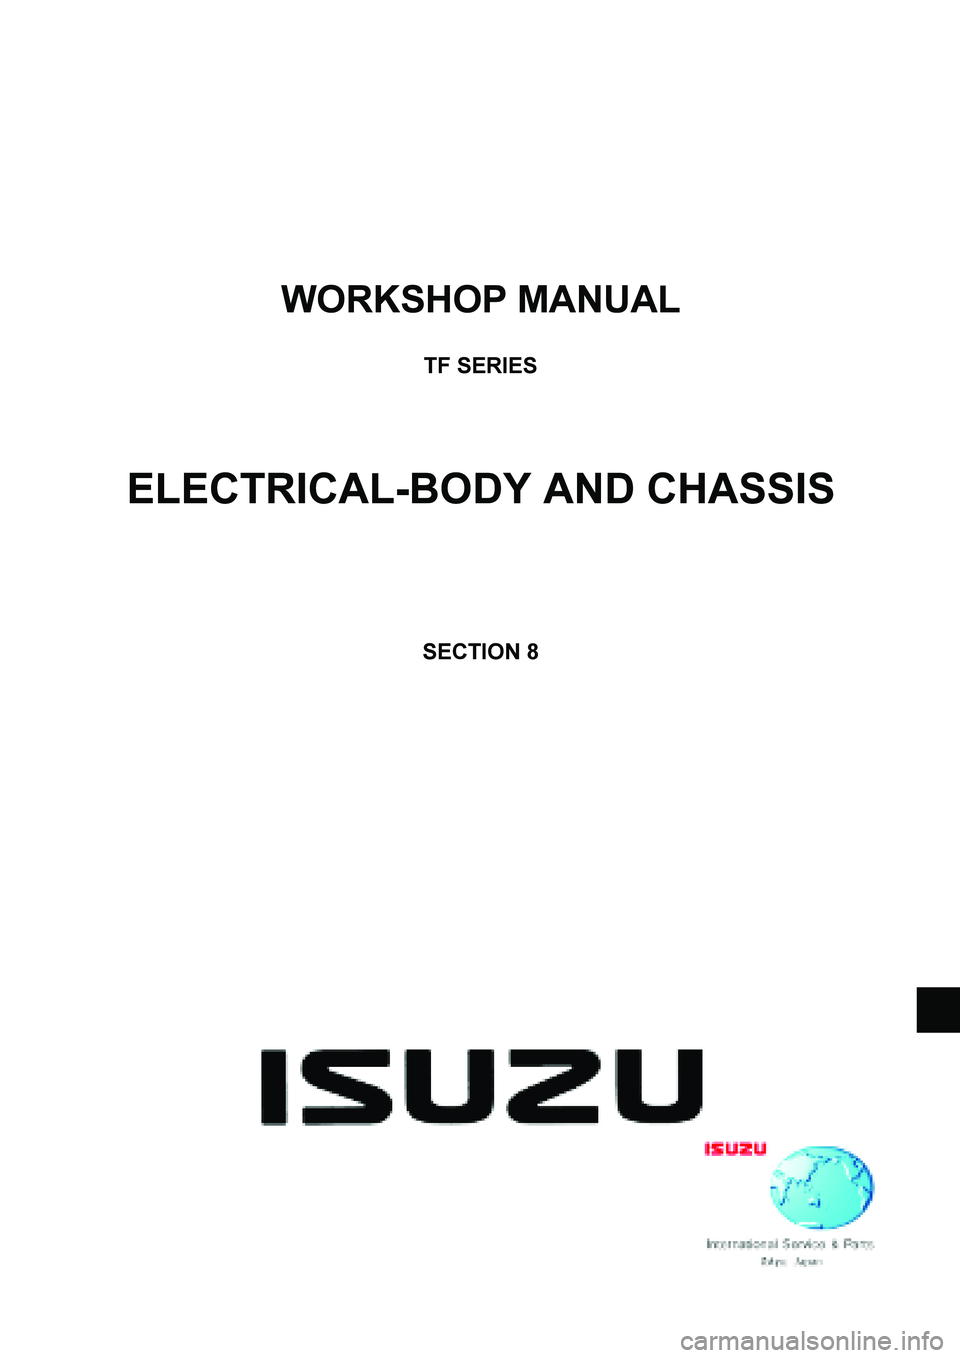 ISUZU TF SERIES 2004  Workshop Manual  
WORKSHOP MANUAL 
 
TF SERIES 
 
 
 
 
ELECTRICAL-BODY AND CHASSIS 
 
 
 
 
 
 
SECTION 8 
 
 
  